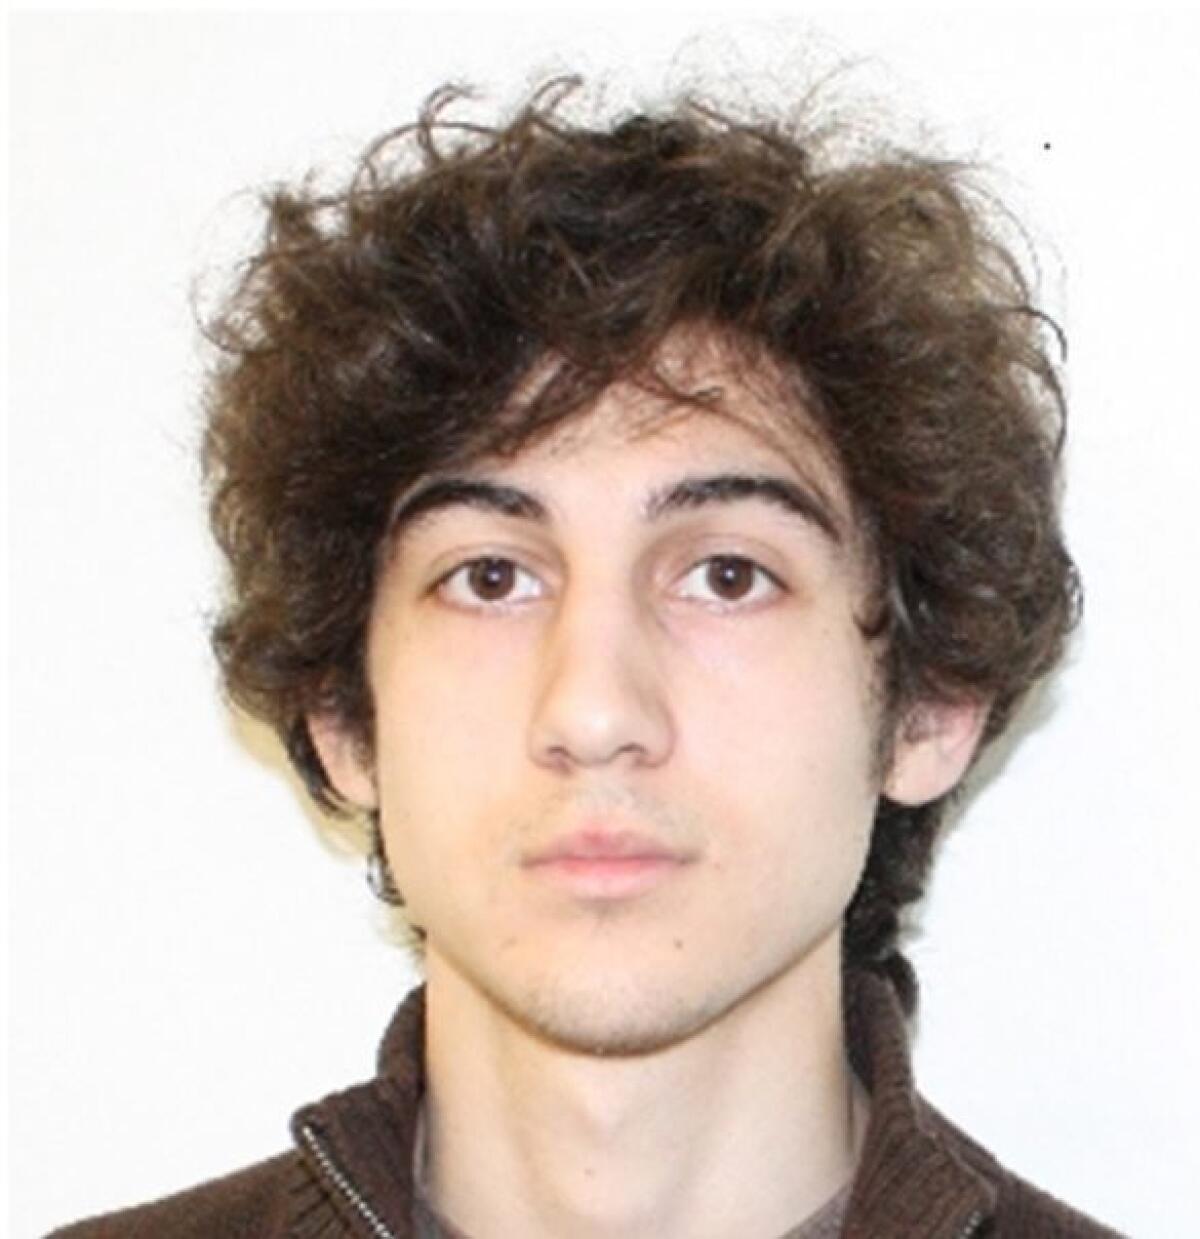 The Justice Department filed papers Thursday in federal court in Boston saying that it intends to seek the death penalty against Dzhokhar Tsaernev, the surviving brother of the duo suspected of planting the bombs.